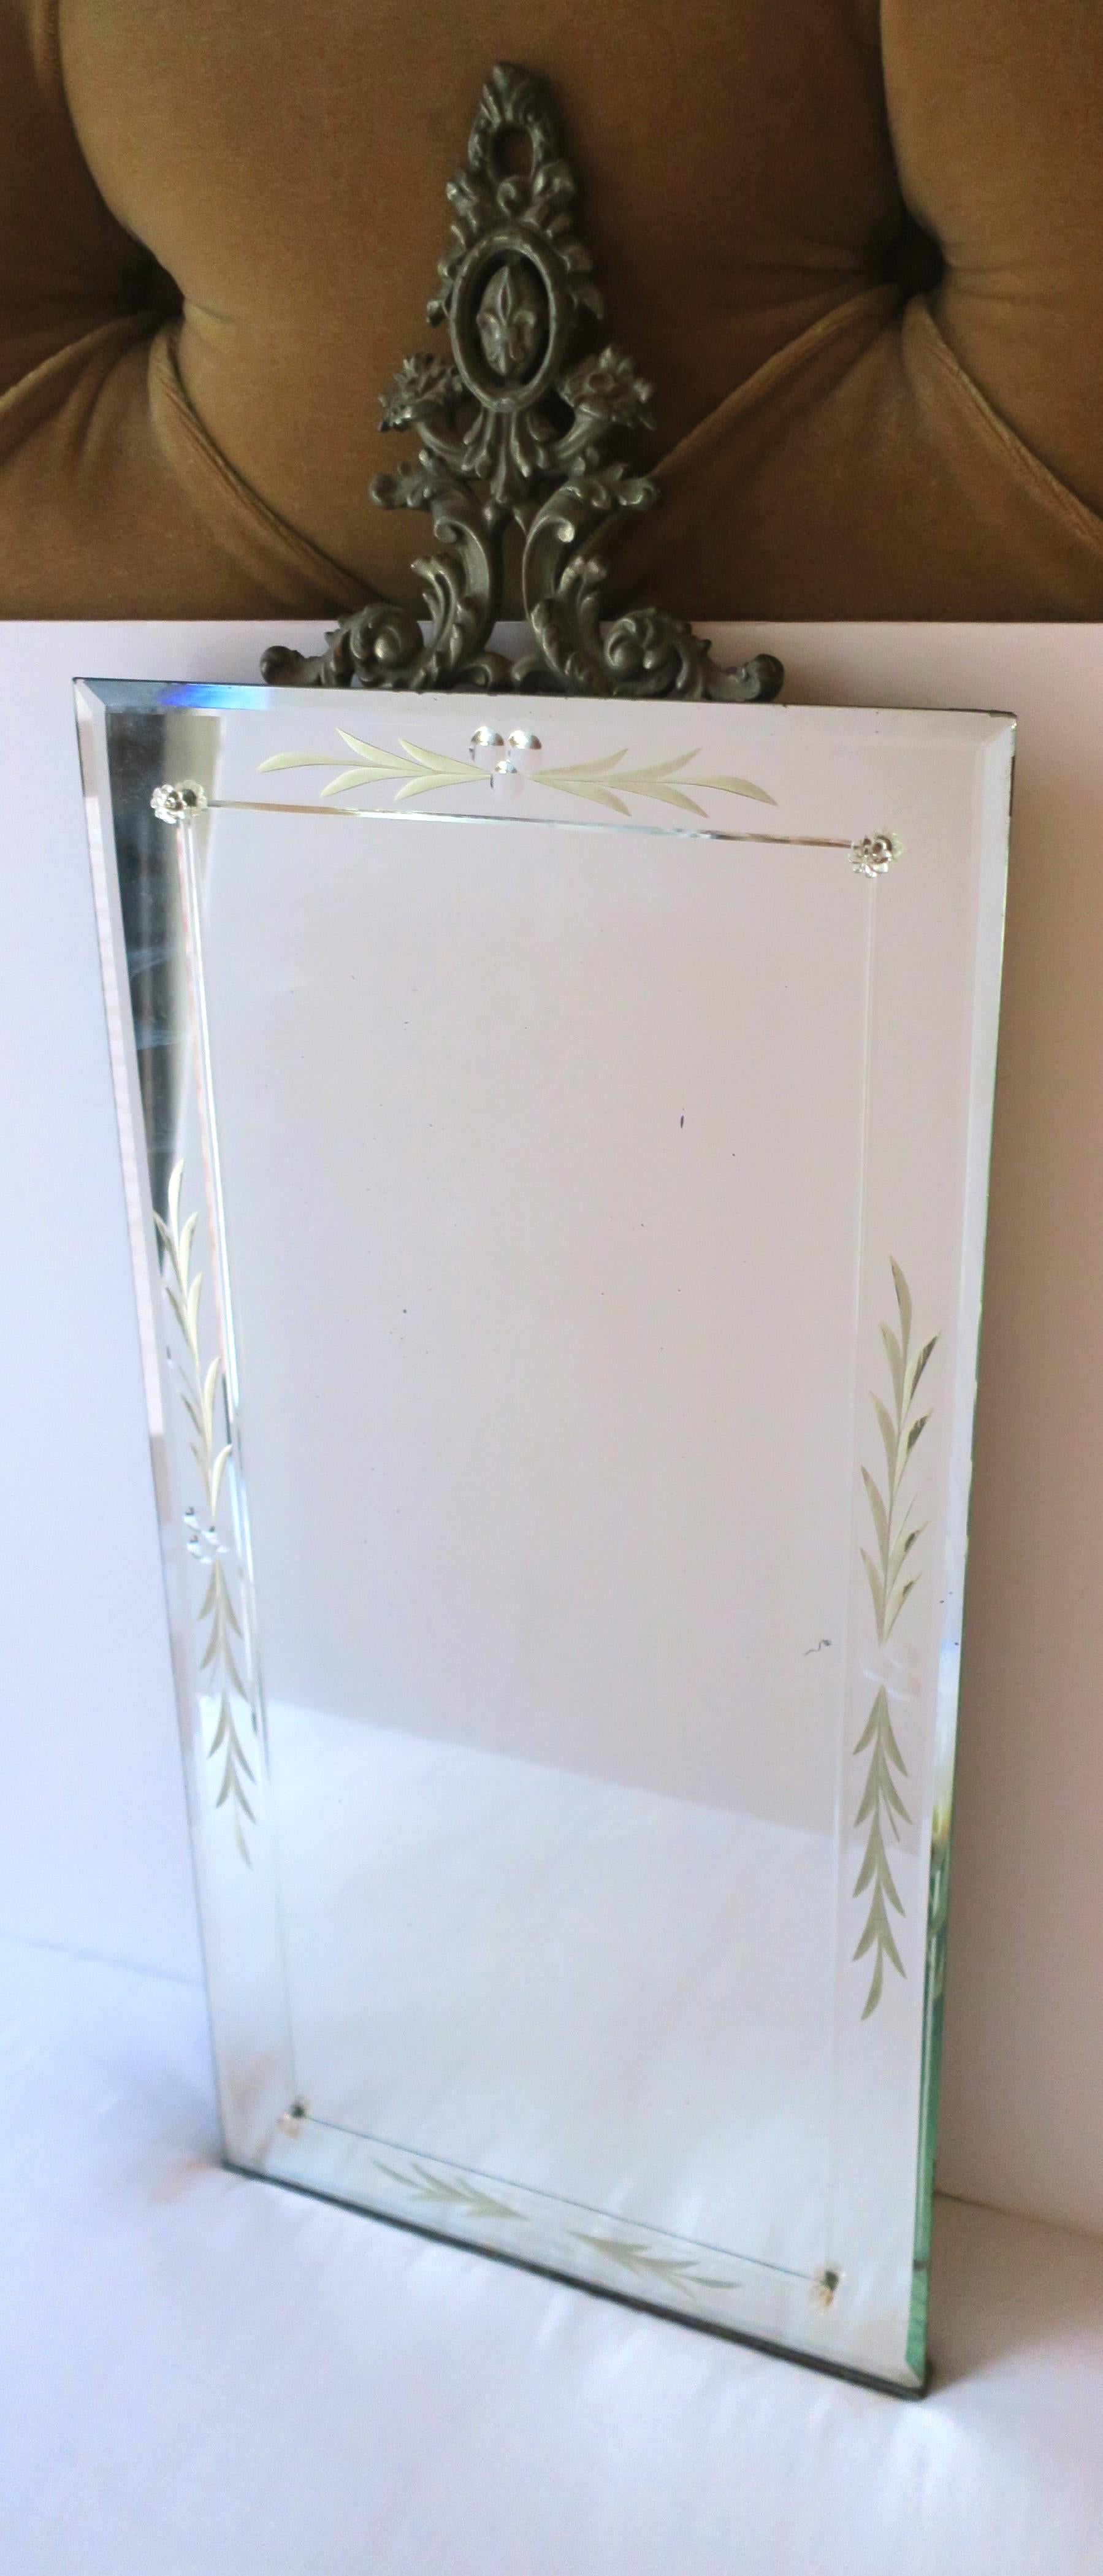 American Wall Hall Foyer Vanity Mirror with Etched Design For Sale